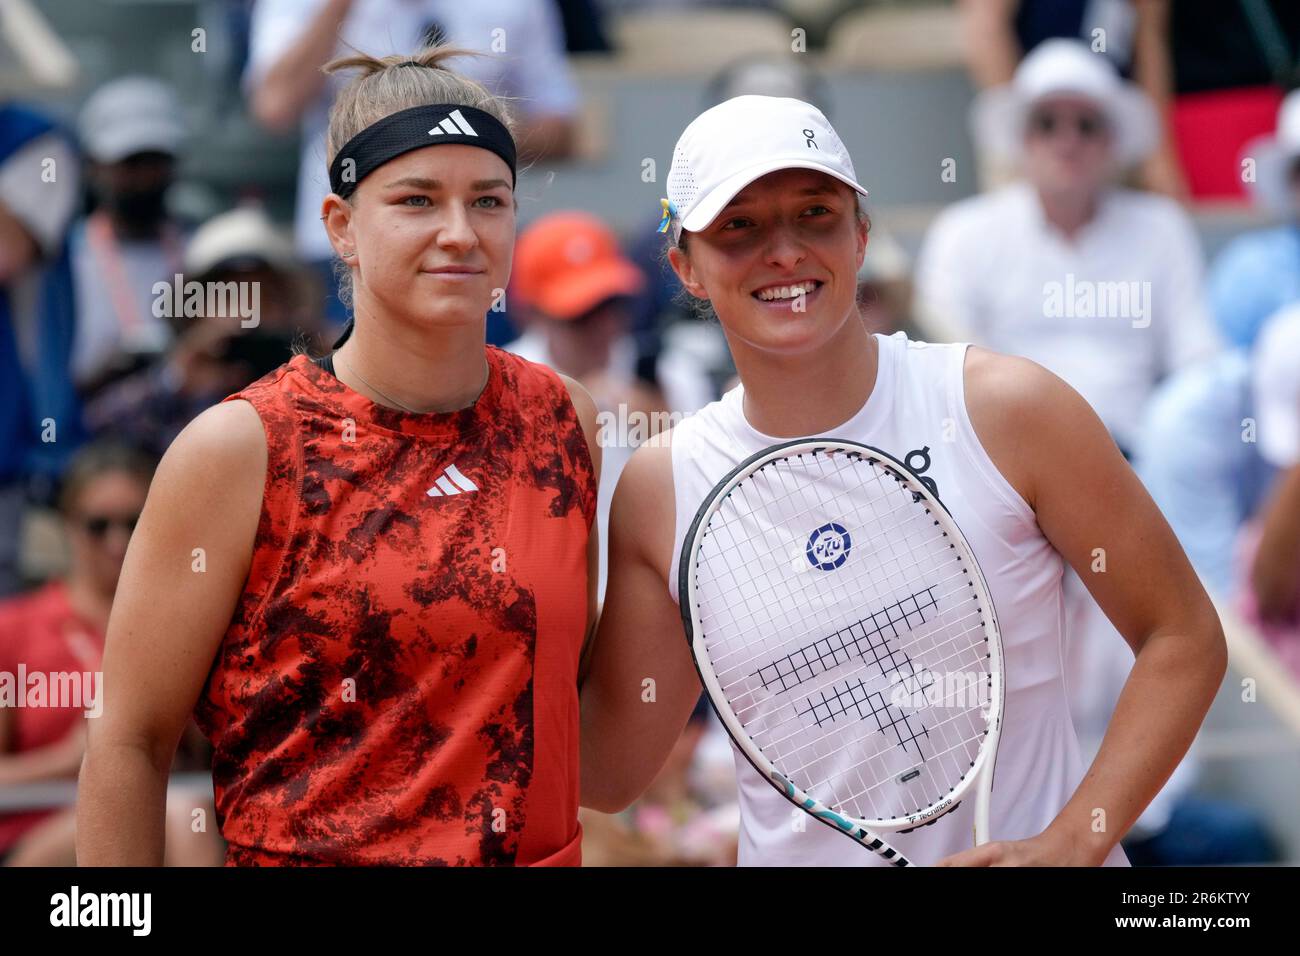 Karolina Muchova of the Czech Republic, left, and Polands Iga Swiatek pose ahead of their final match of the French Open tennis tournament at the Roland Garros stadium in Paris, Saturday, June